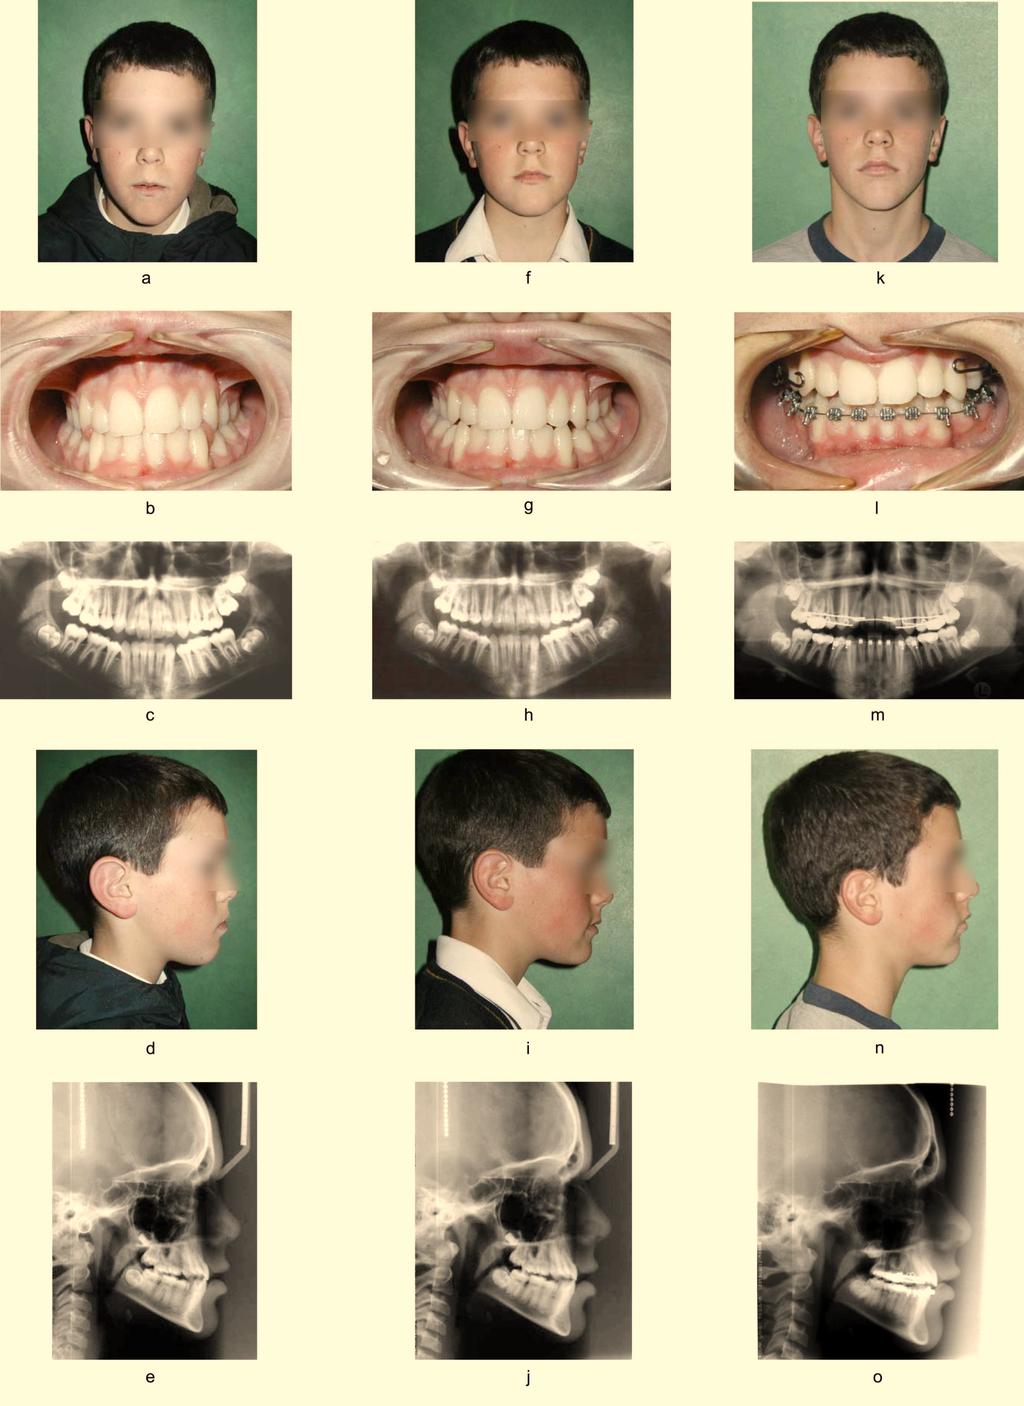 44 The Open Rehabilitation Journal, 2009, Volume 2 Wurgaft and Wong The higher contact in the right side was left until there was no pain during mouth opening; no click and no mandibular deviation